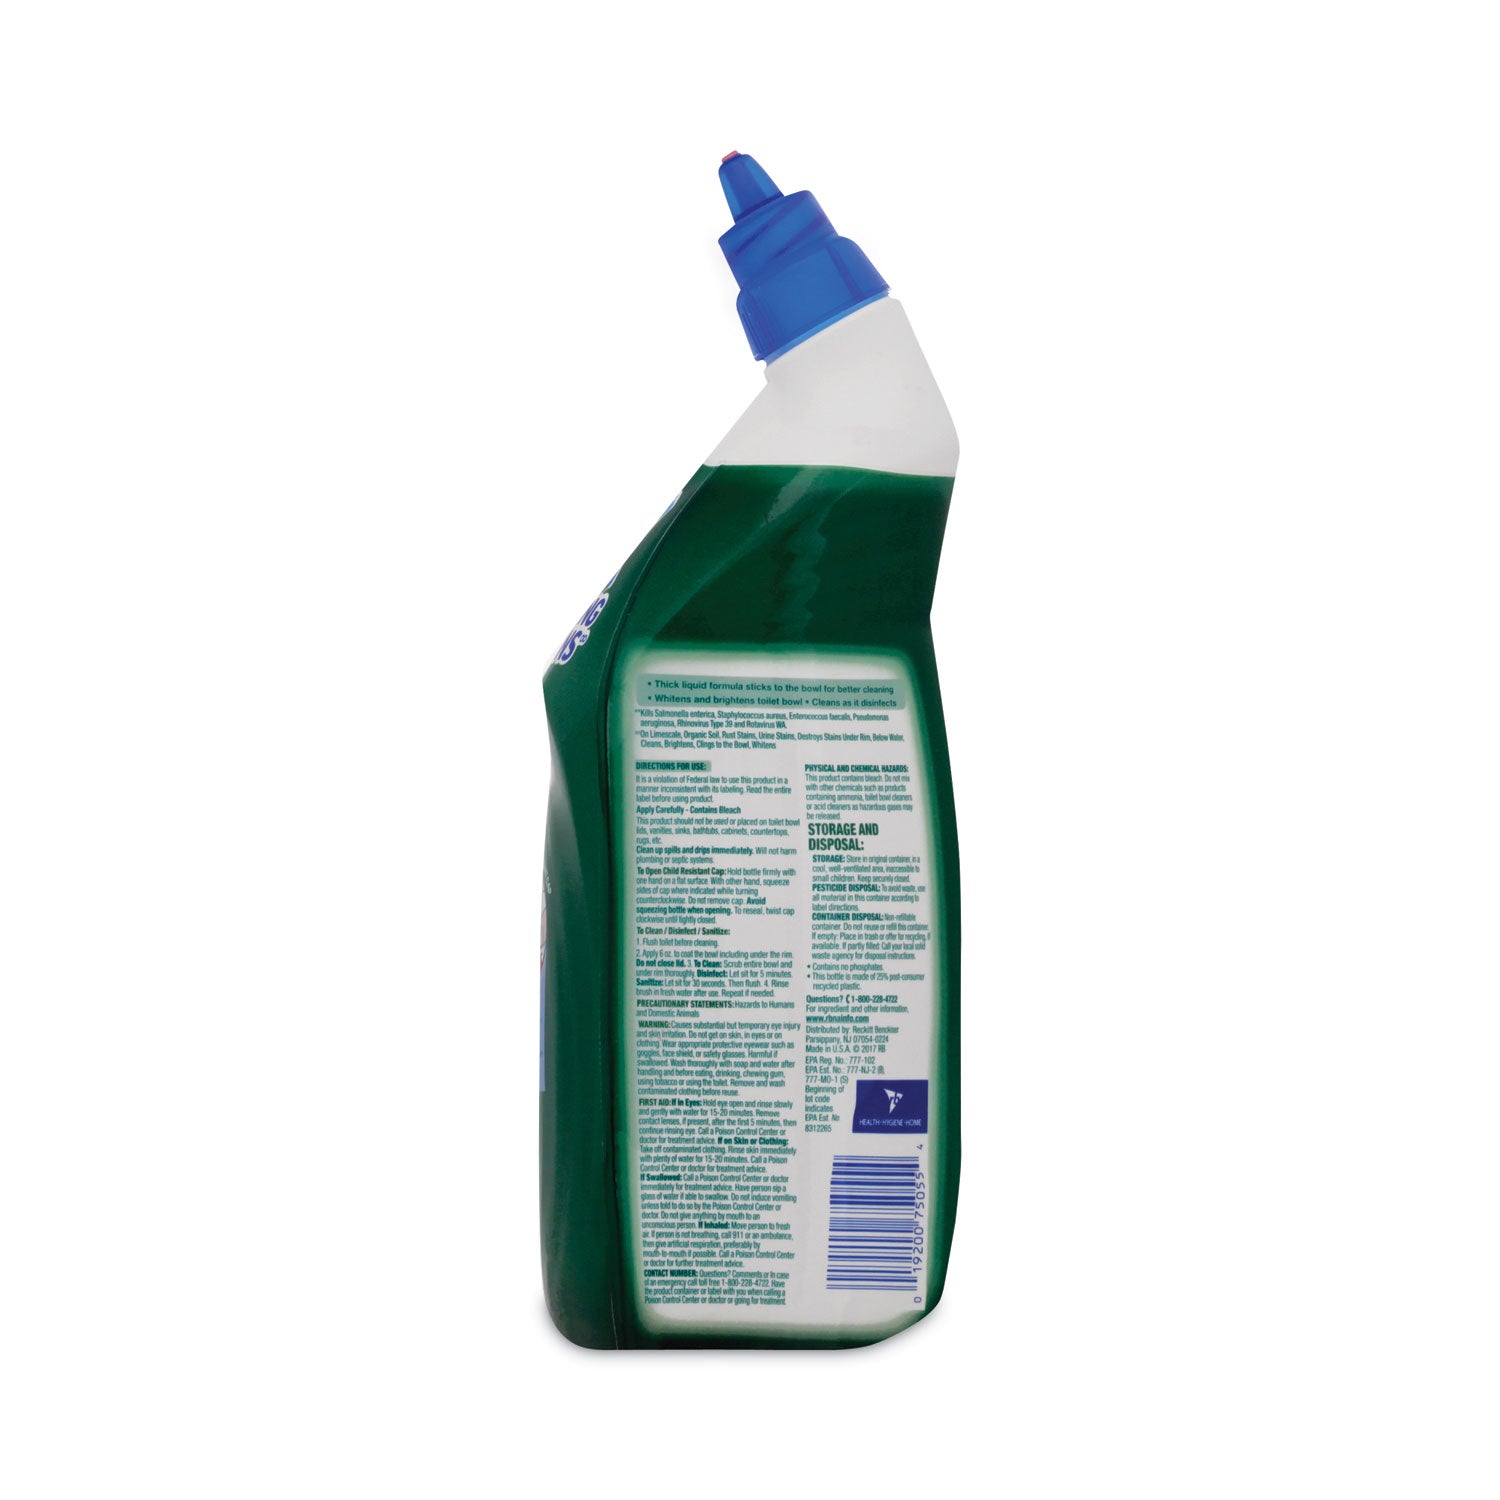 disinfectant-toilet-bowl-cleaner-with-bleach-24-oz-2-pack_rac96085pk - 3